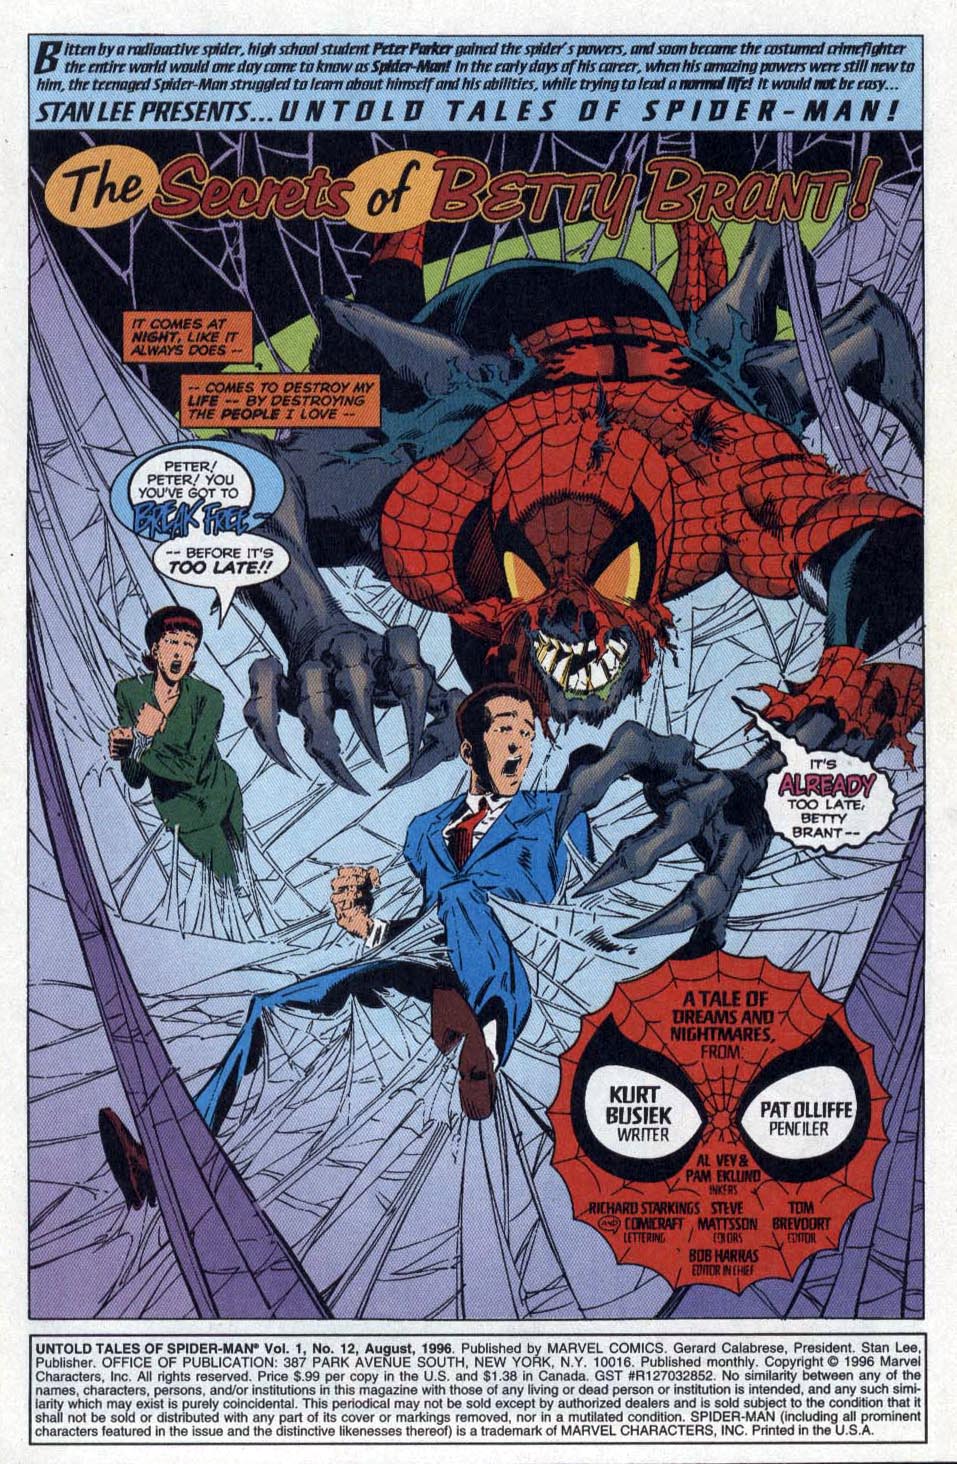 Read online Untold Tales of Spider-Man comic -  Issue #12 - 2